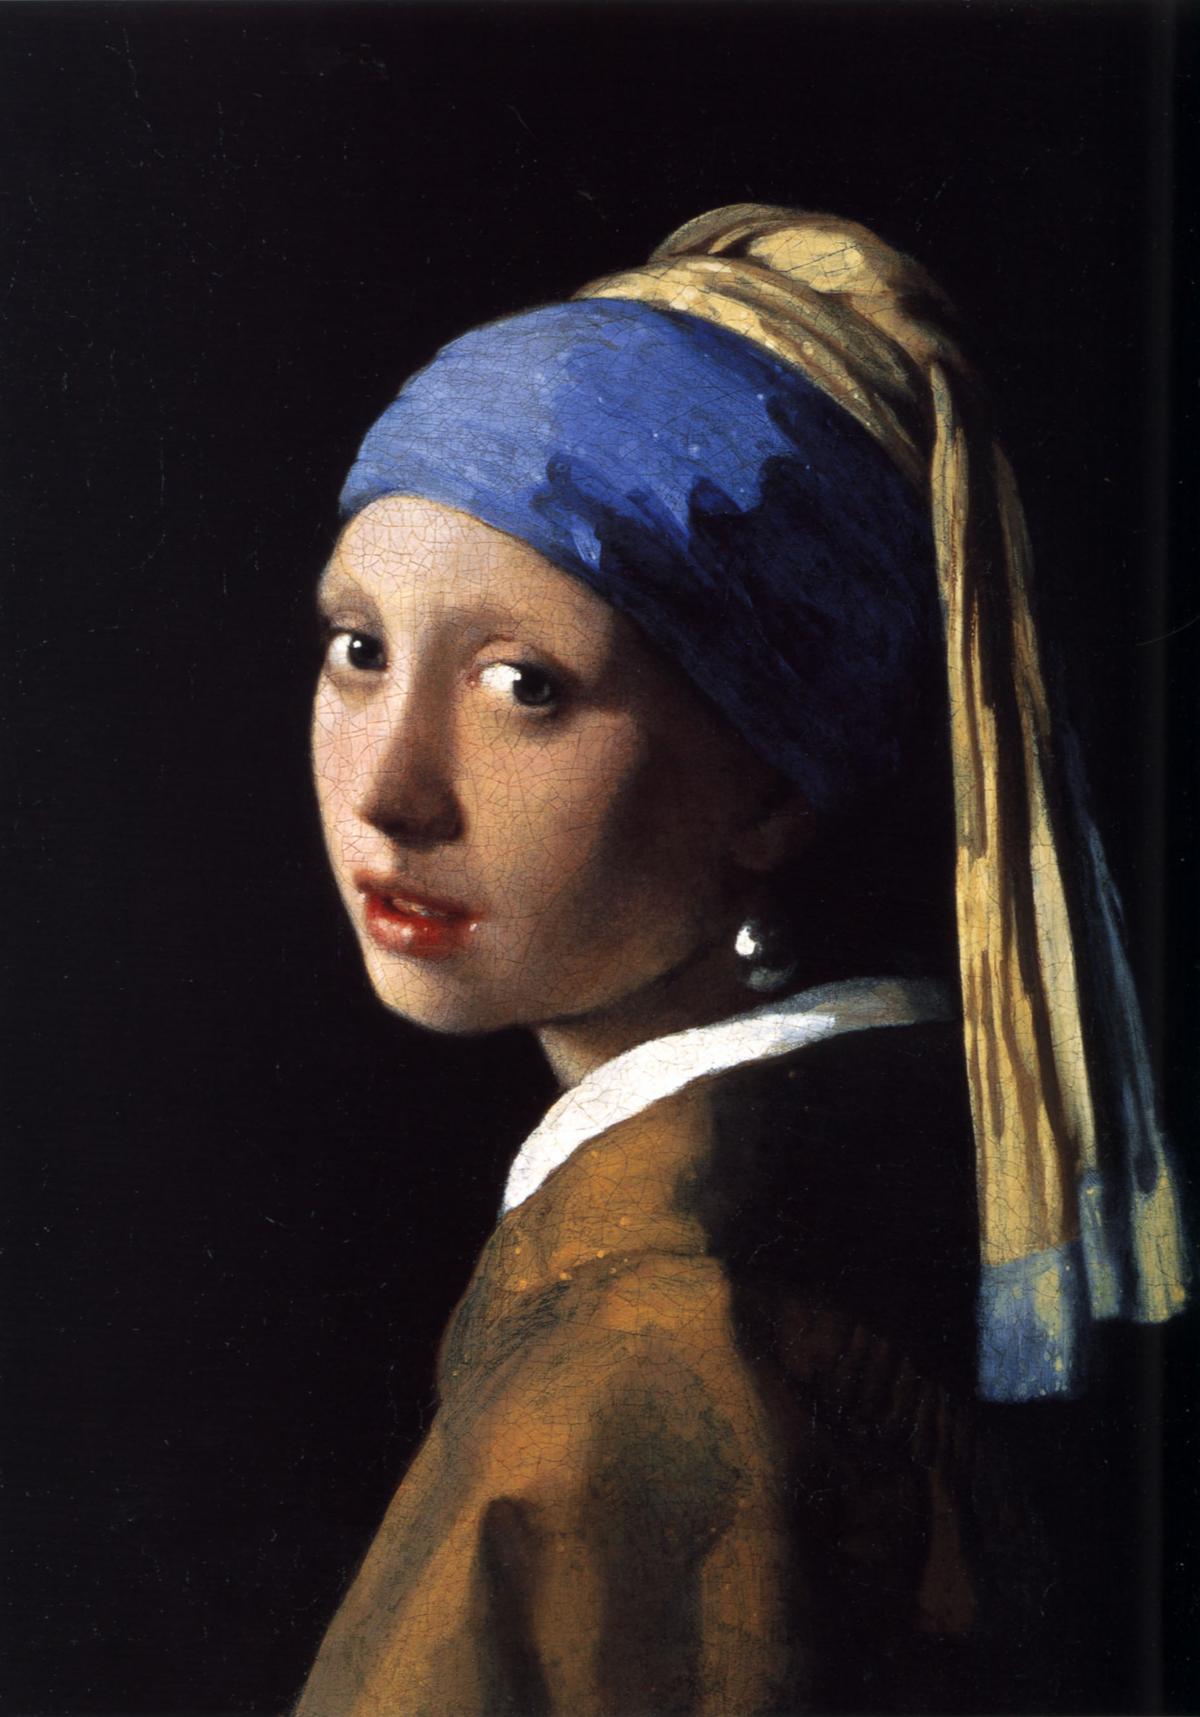 Most would say that Johannes Vermeer achieved arete with his famous painting "Girl with a Pearl Earring." Royal Picture Gallery Mauritshuis, The Hague. (Public Domain)